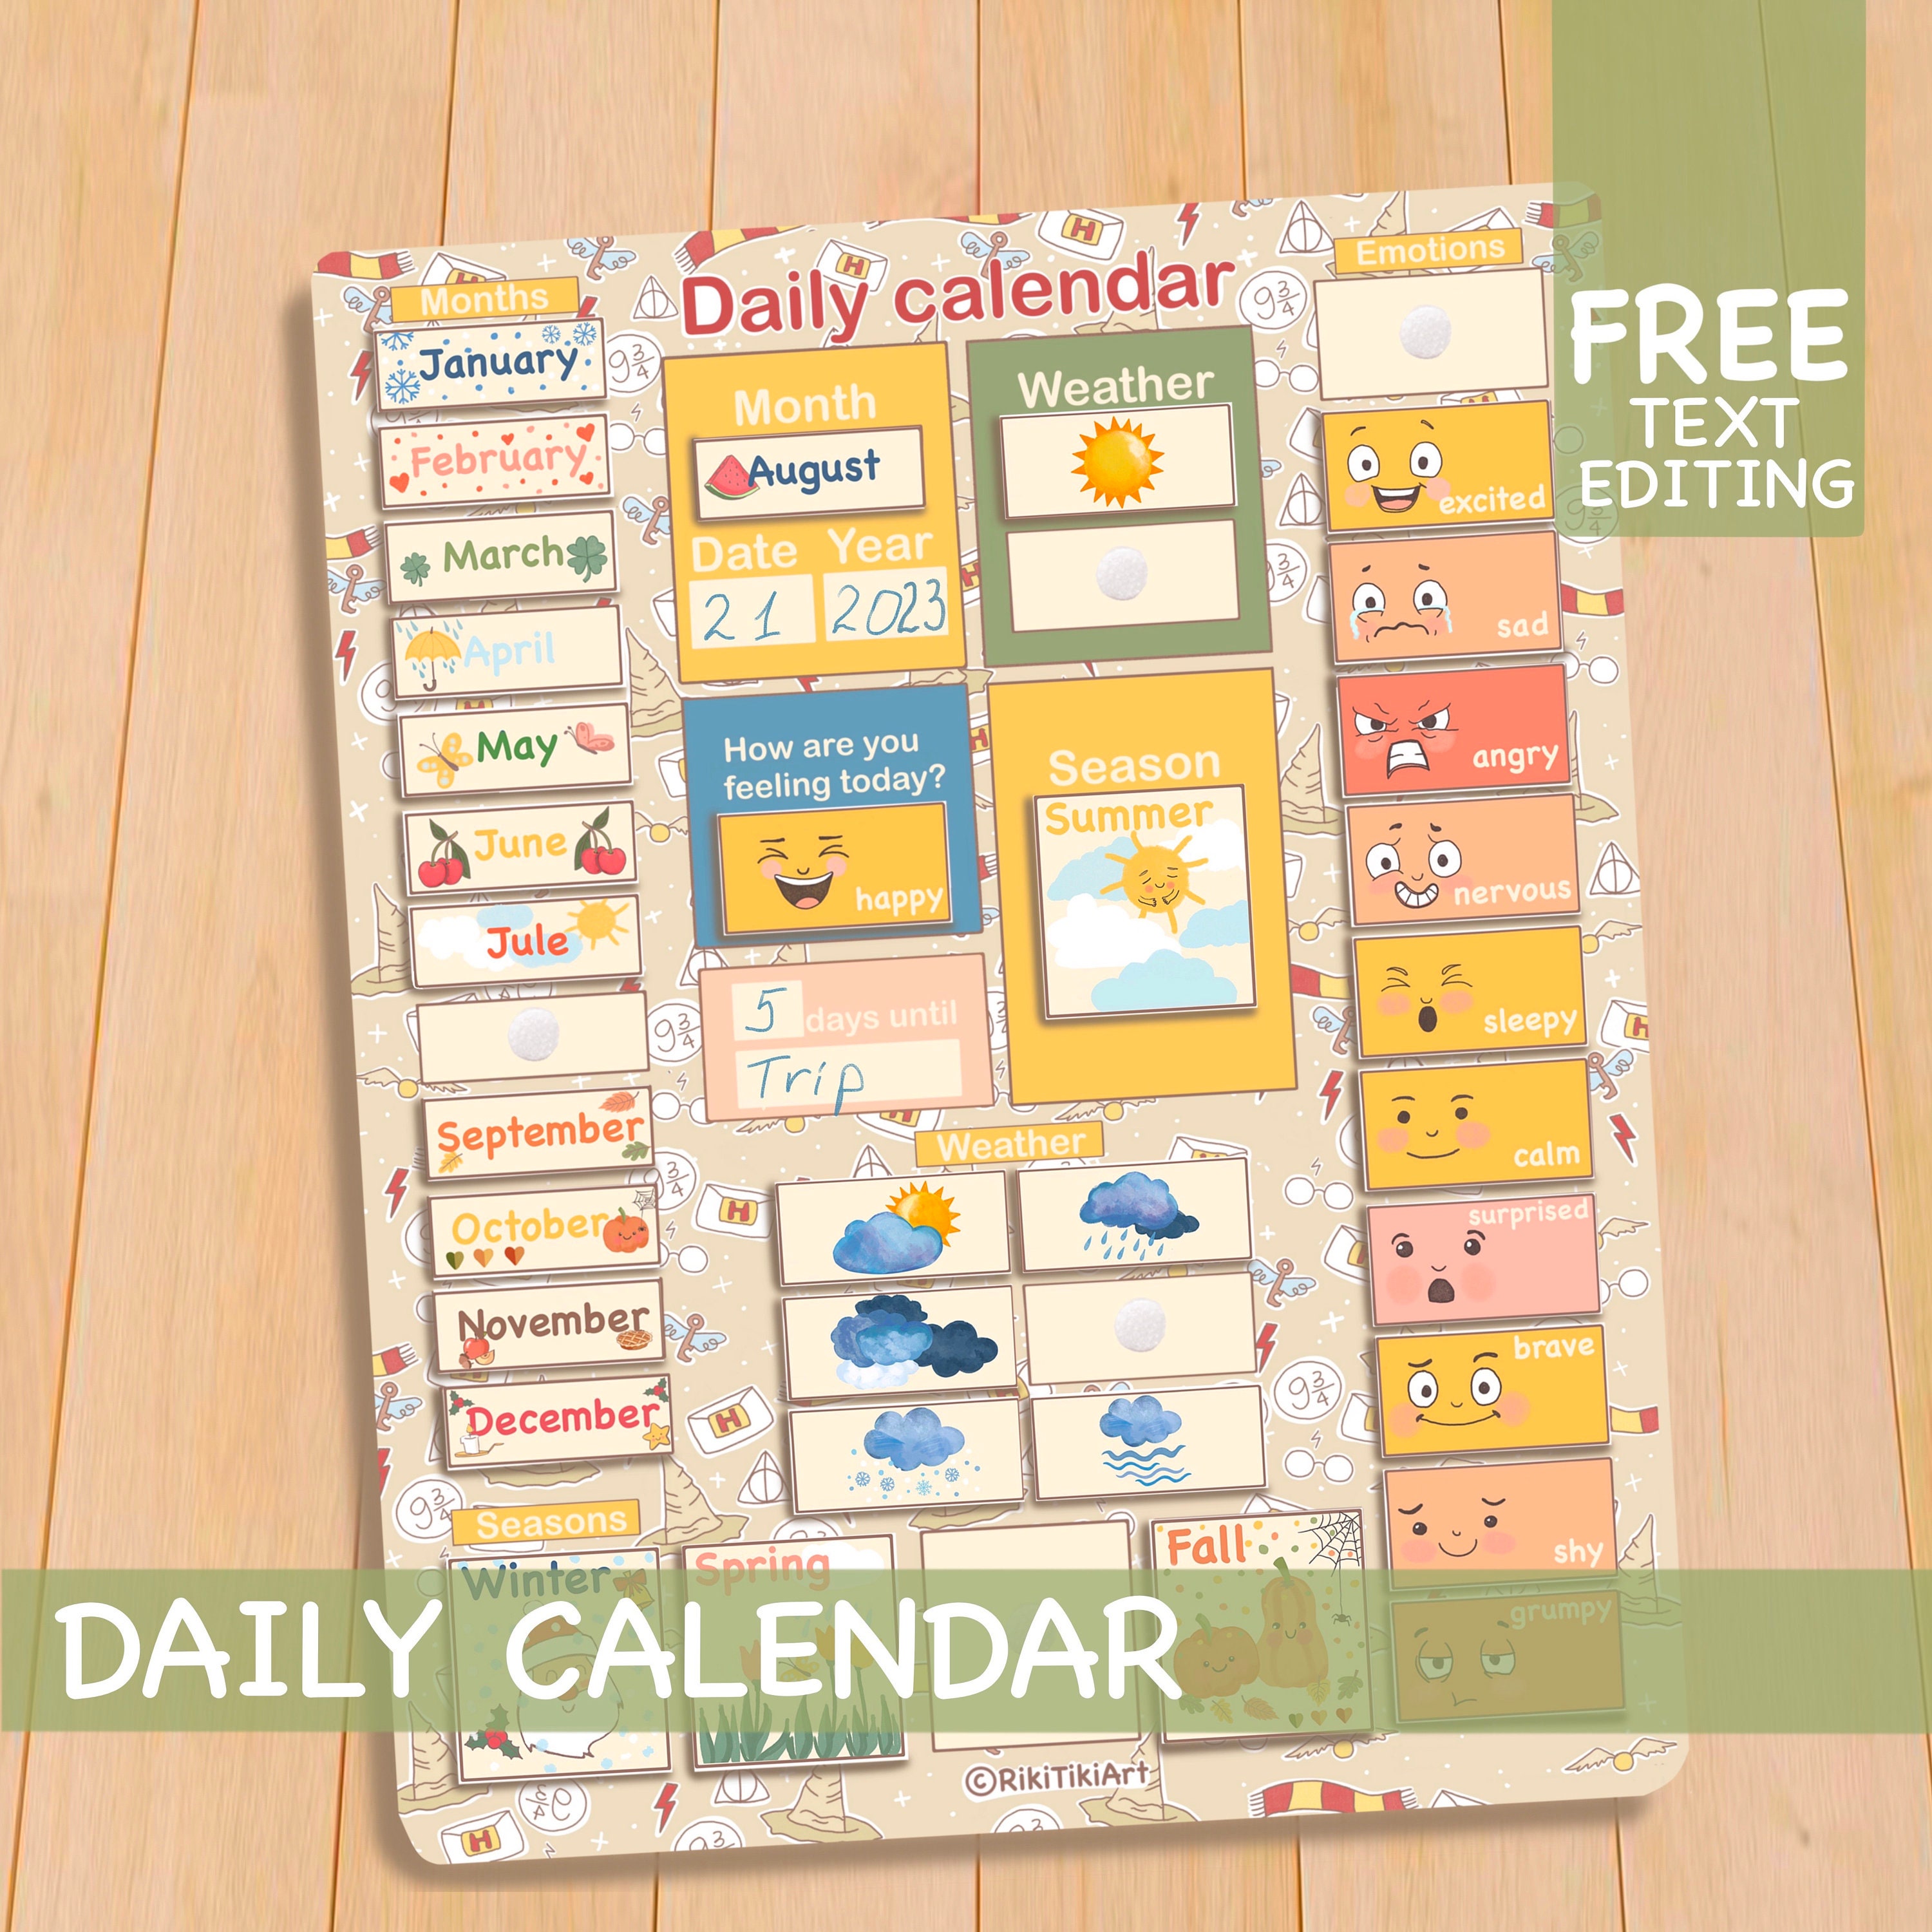 Calendar of :: Arts & Crafts - Kids Jewelry Box :: Ft. Campbell